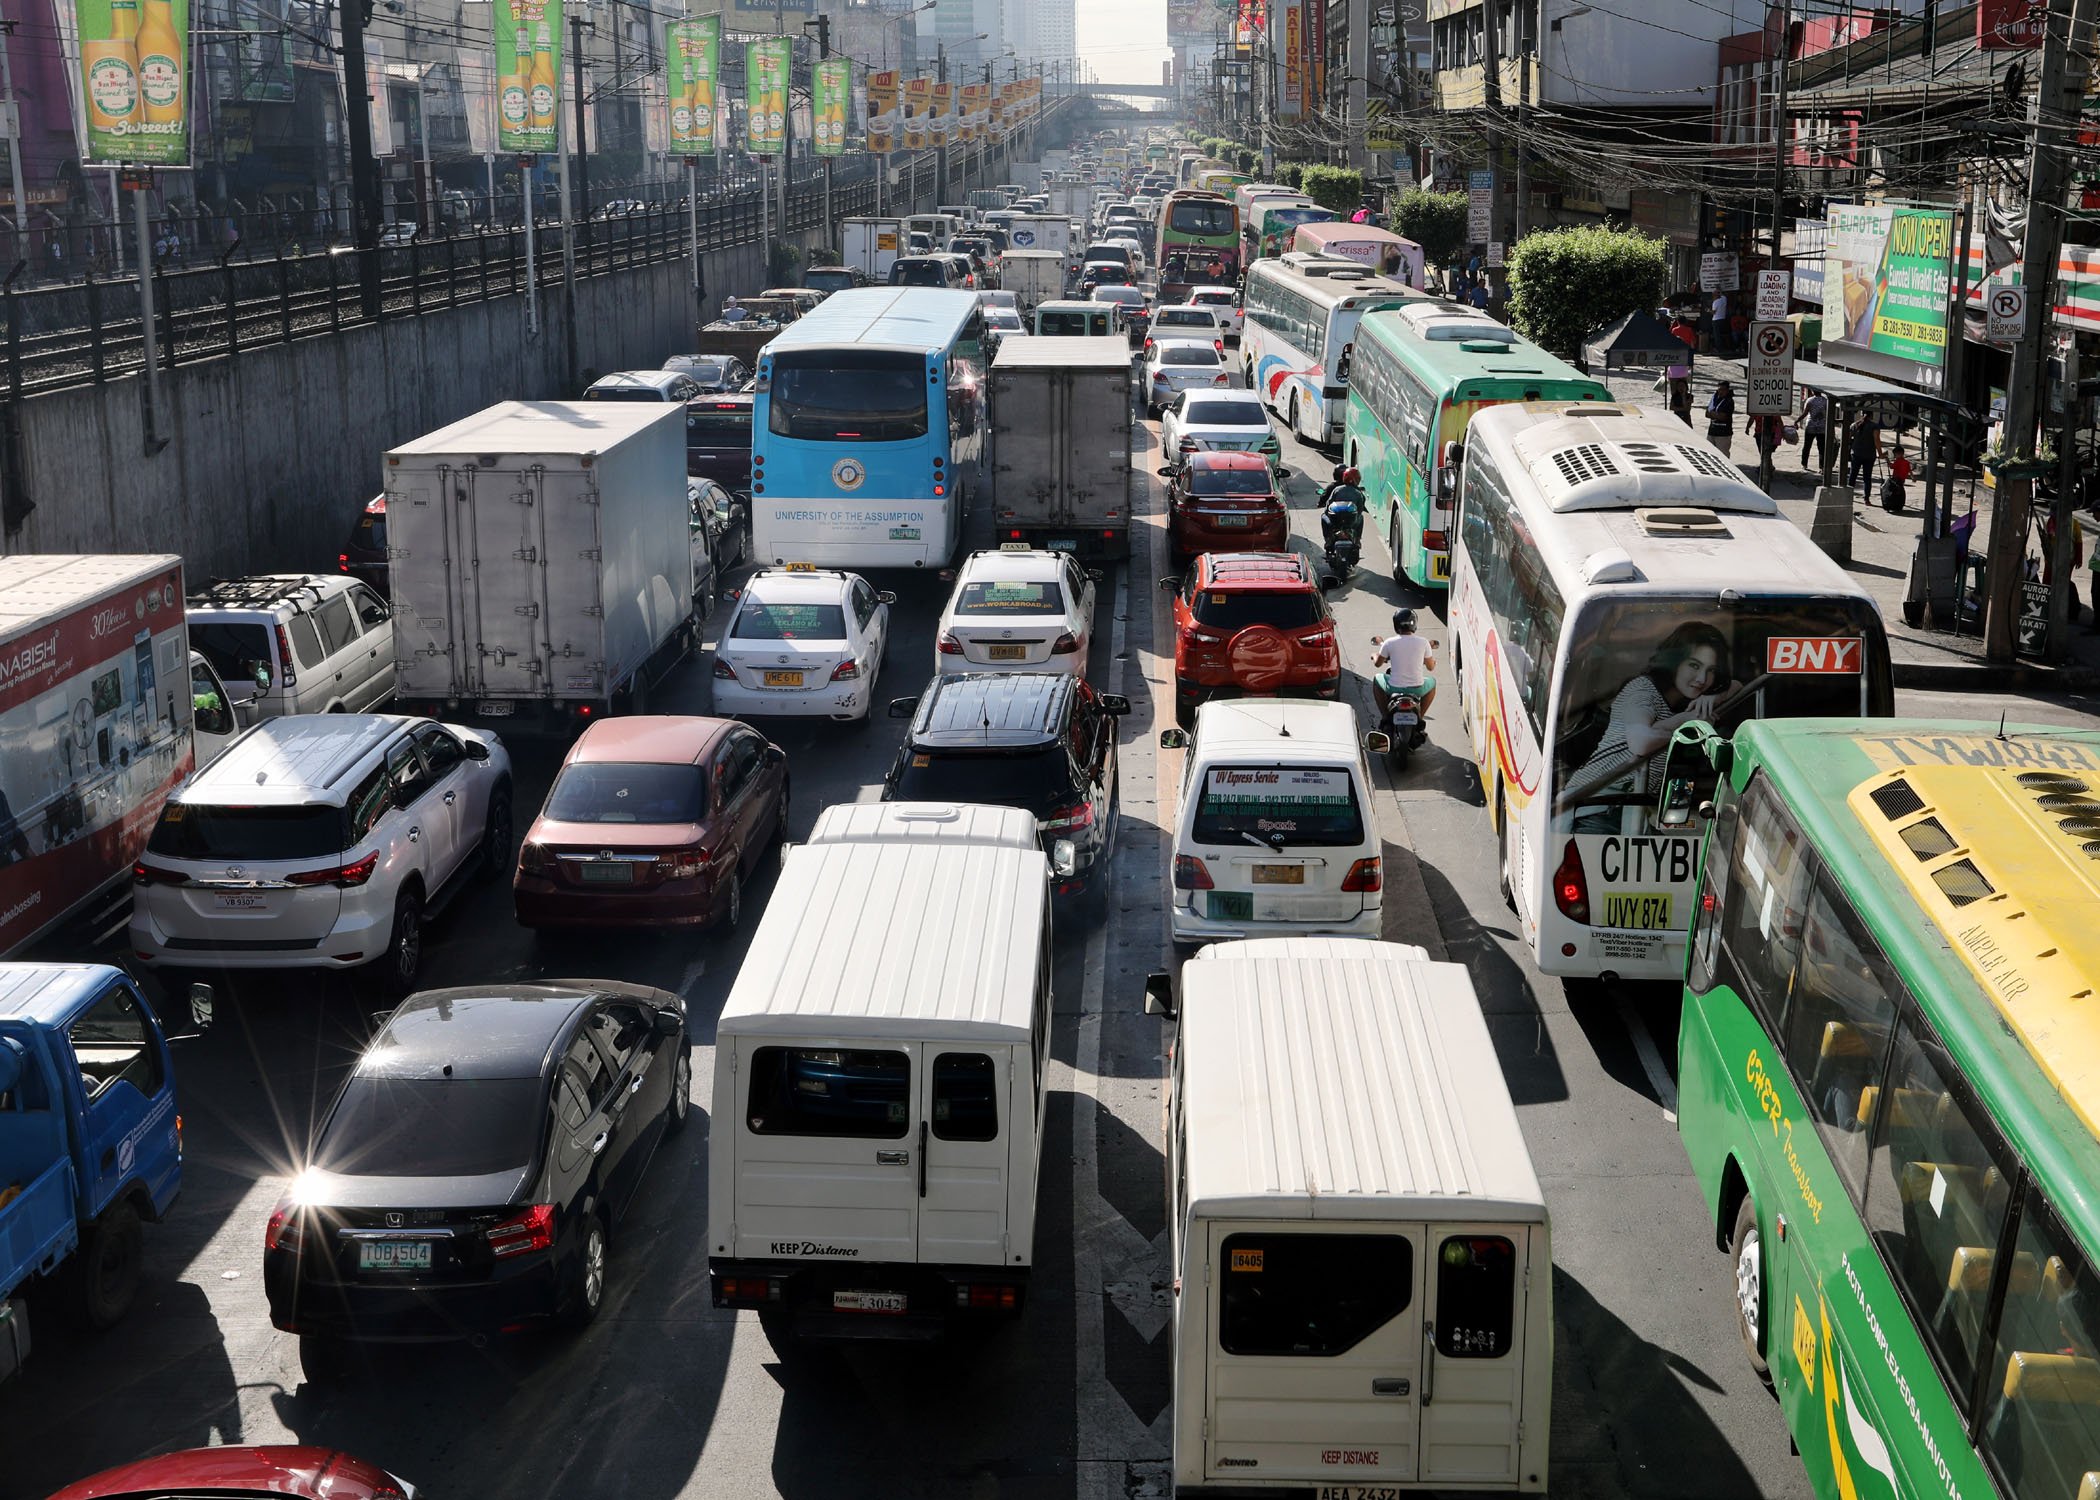 MMDA to extend "no window hours" for another 6 months